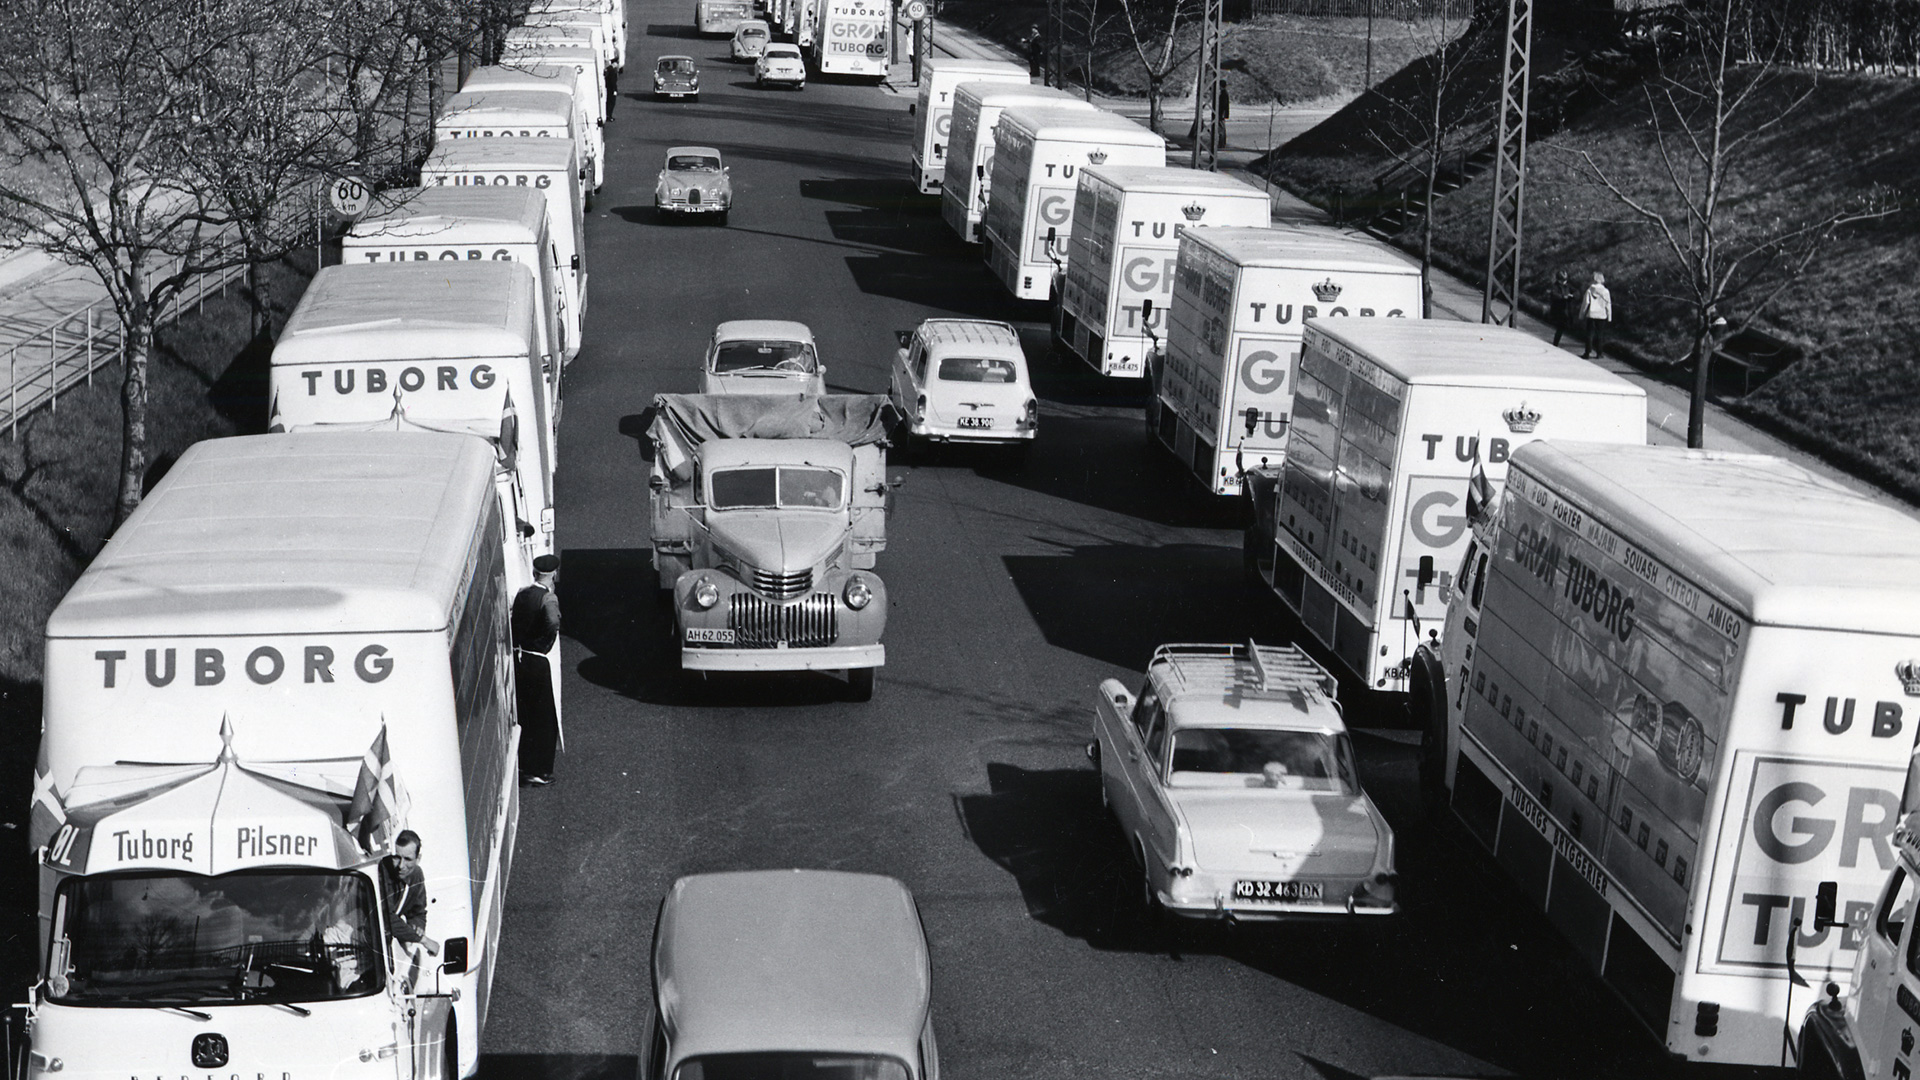 historical black and white image of tuborg trucks lining up on a street